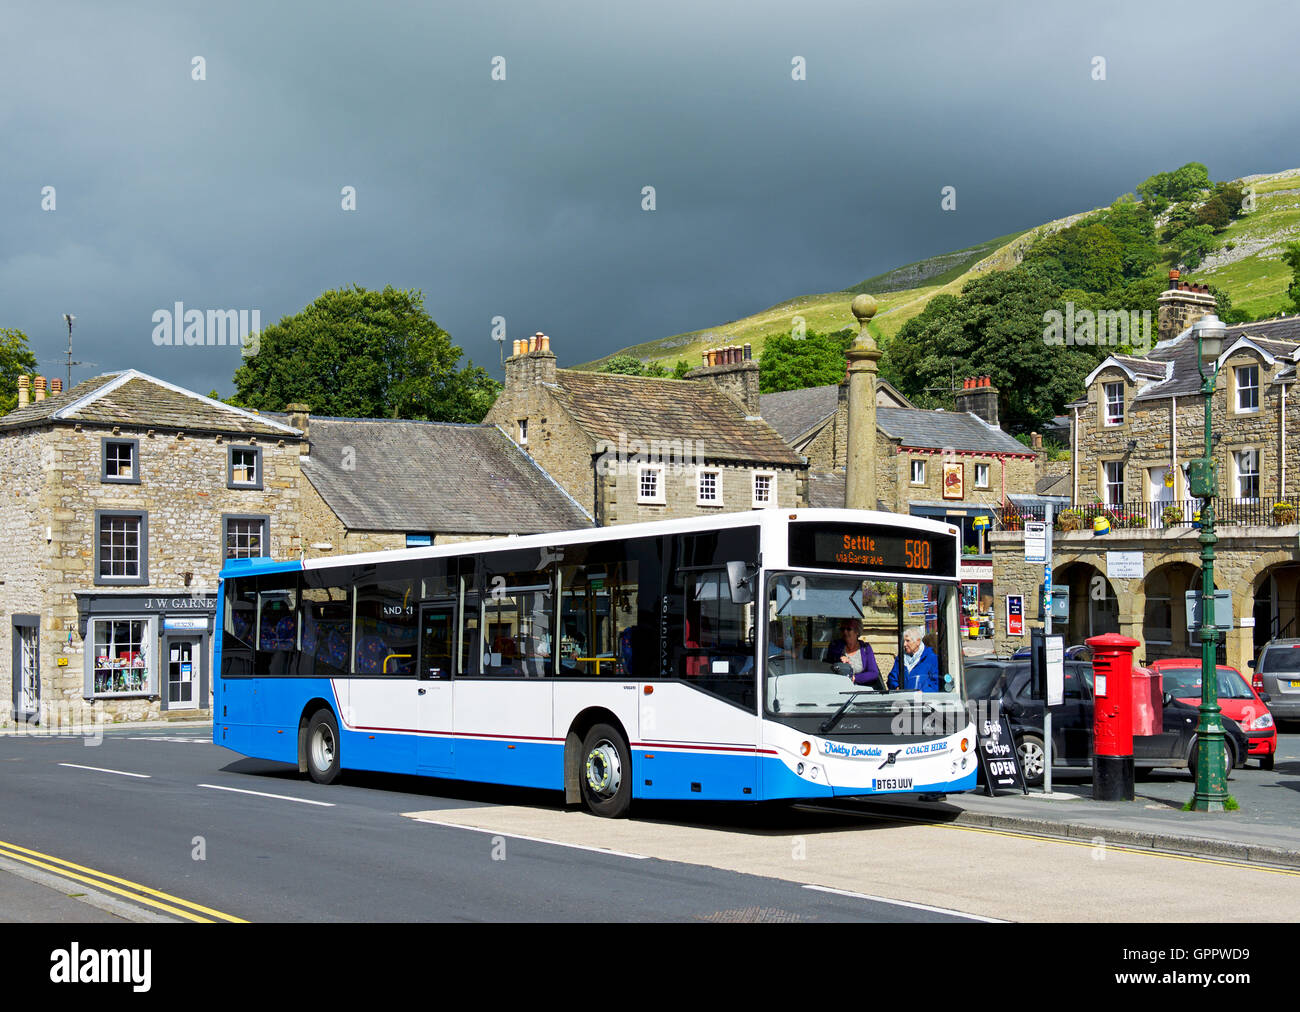 Bus in the market square, Settle, North Yorkshire, England UK Stock Photo